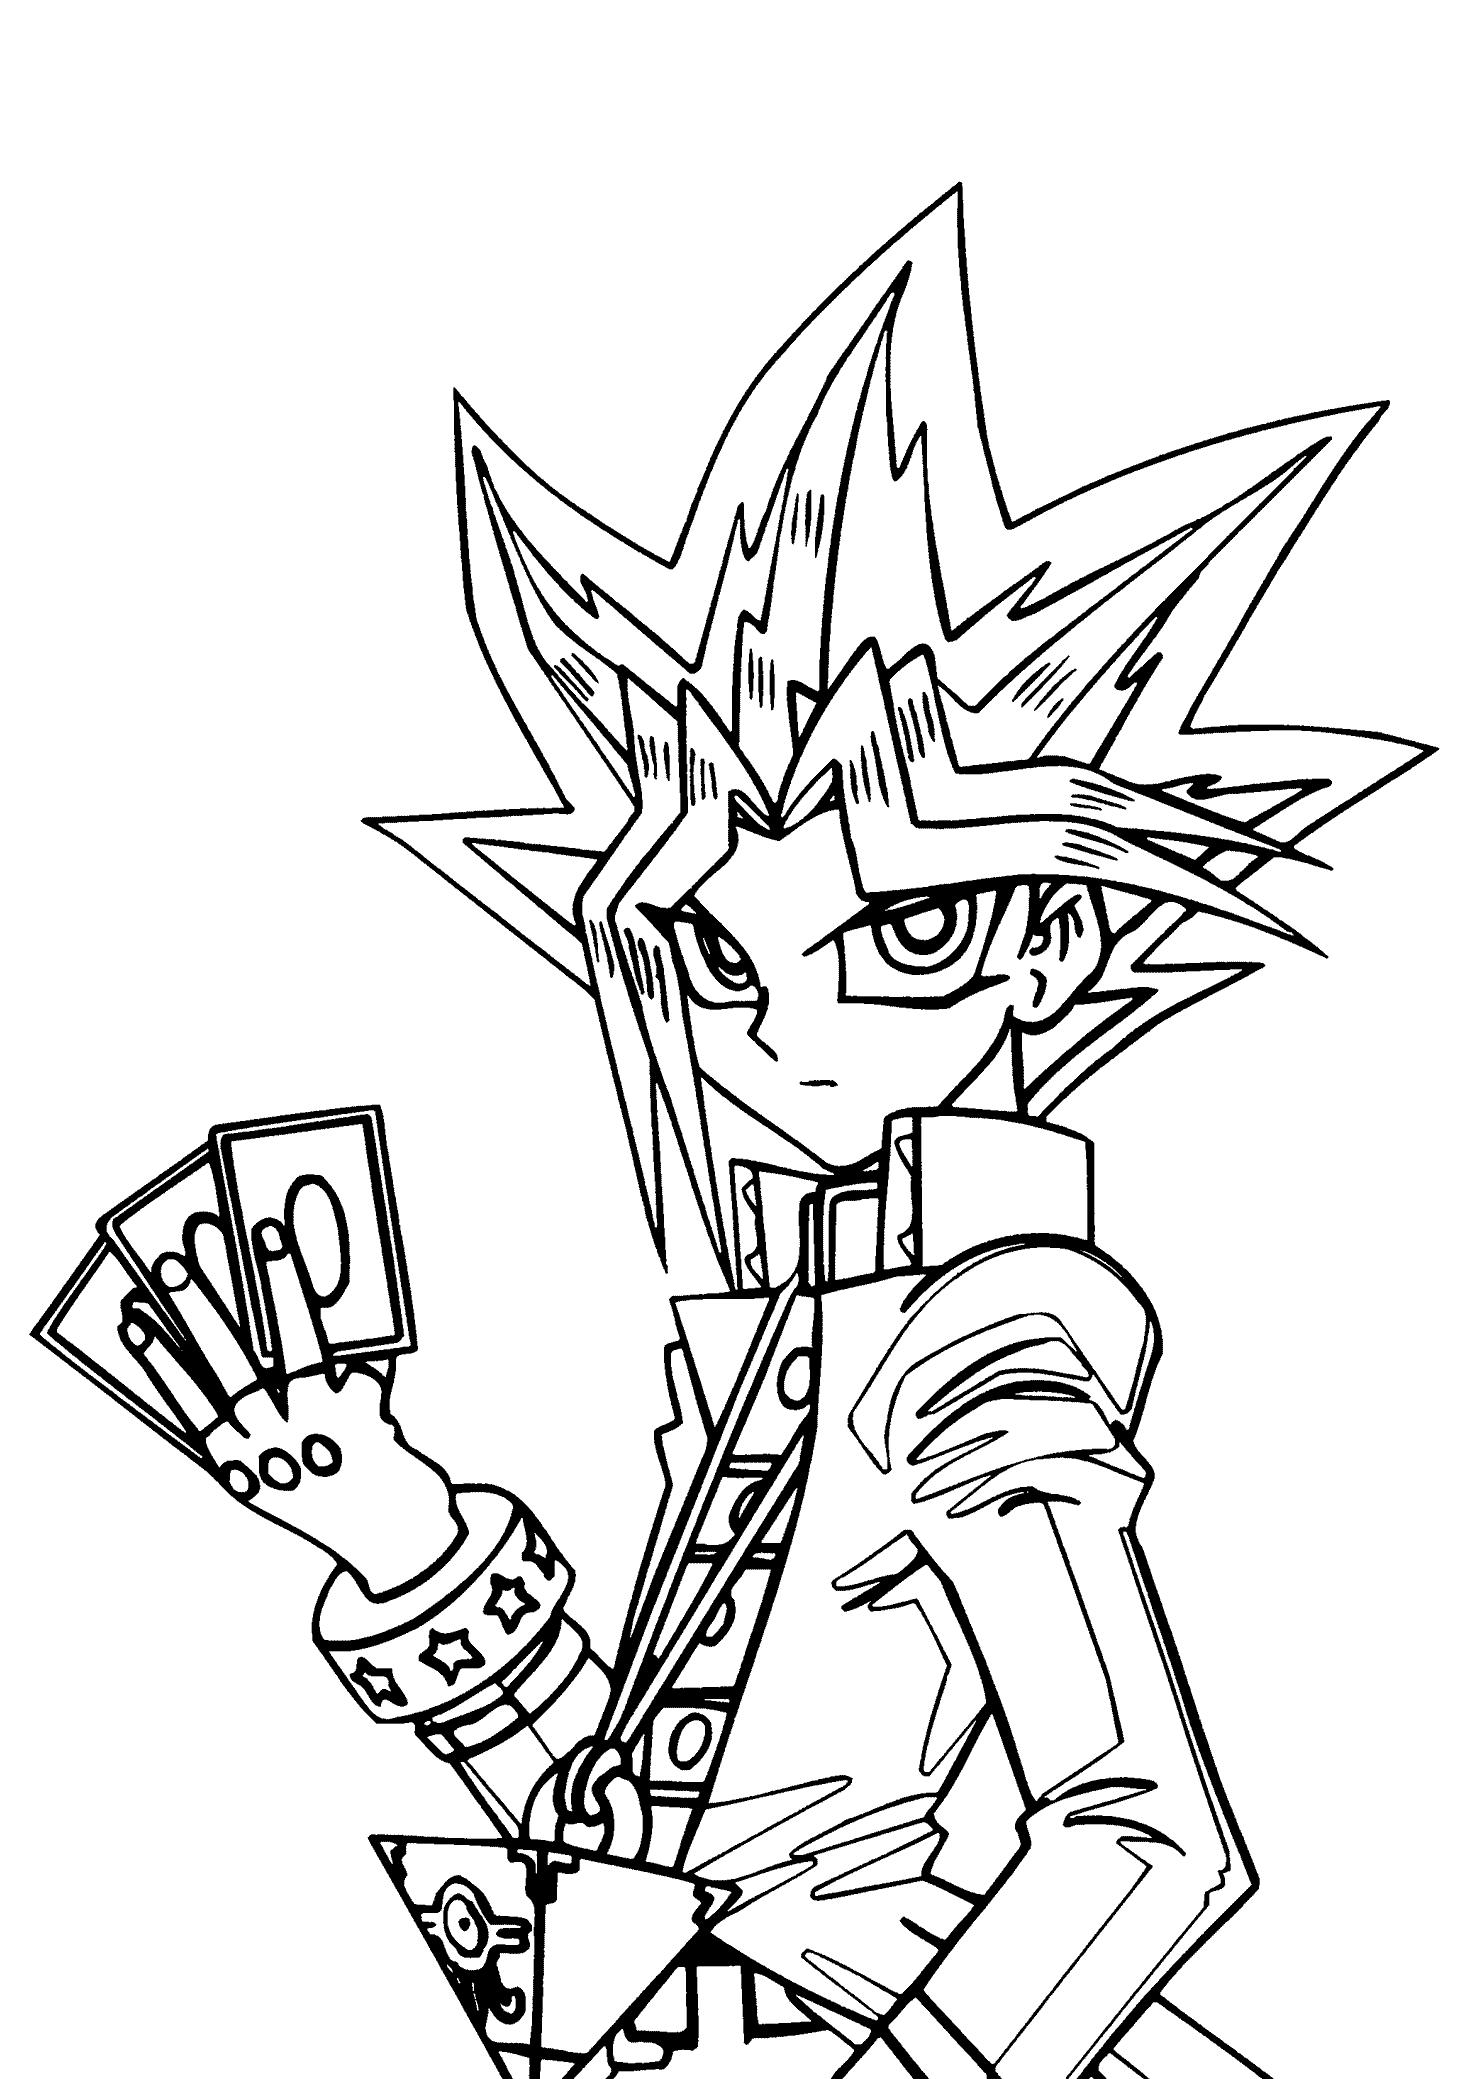 Yu gi oh manga coloring pages for kids printable free monster coloring pages cartoon coloring pages coloring pages inspirational